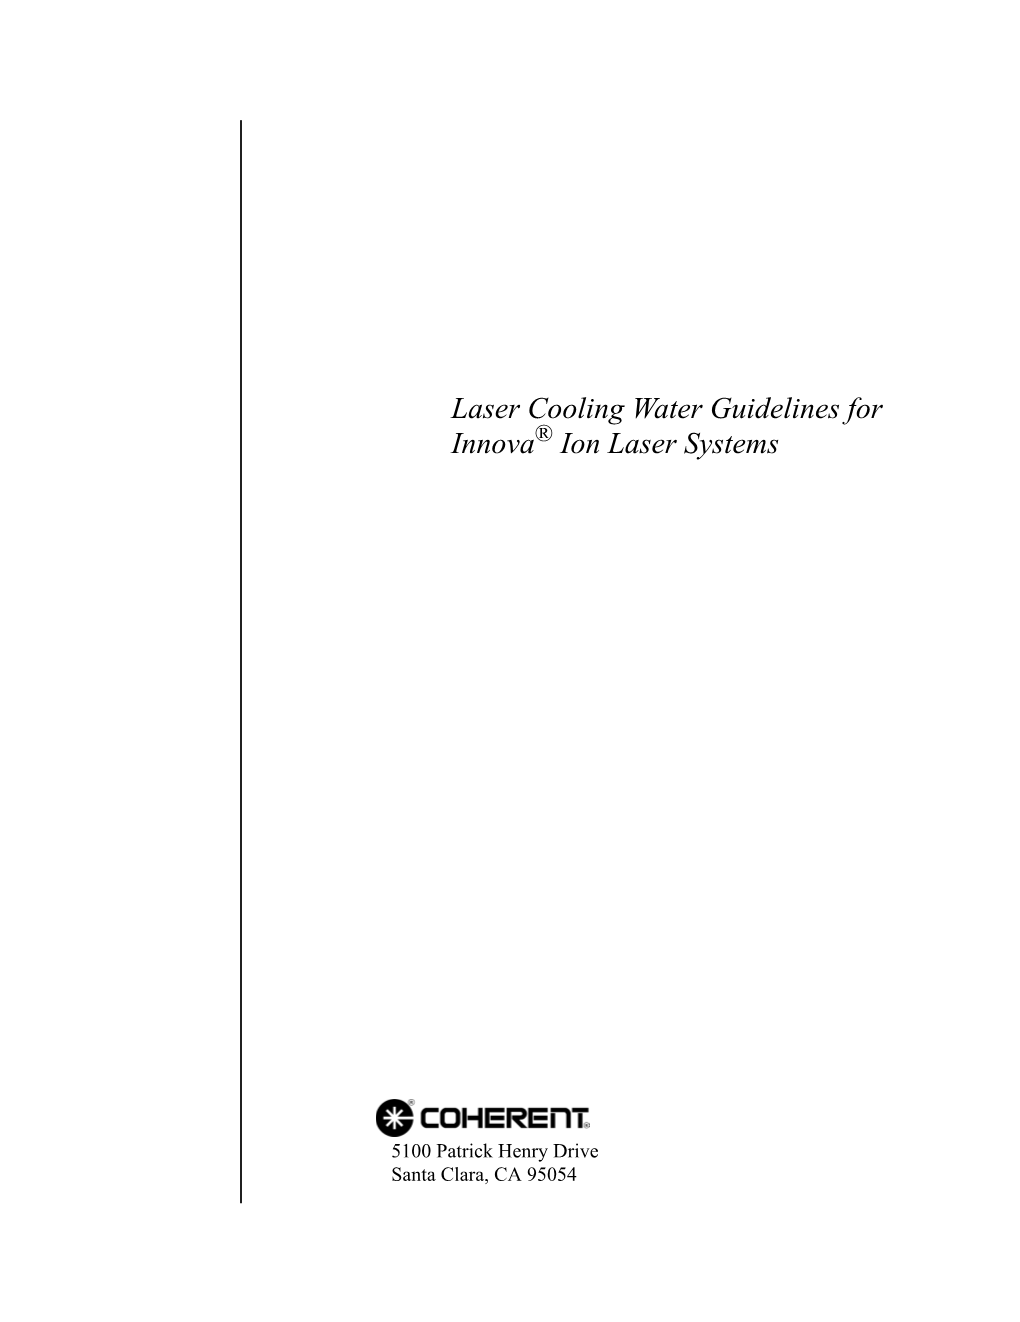 Laser Cooling Water Guidelines for Innova Ion Laser Systems © Coherent, Inc